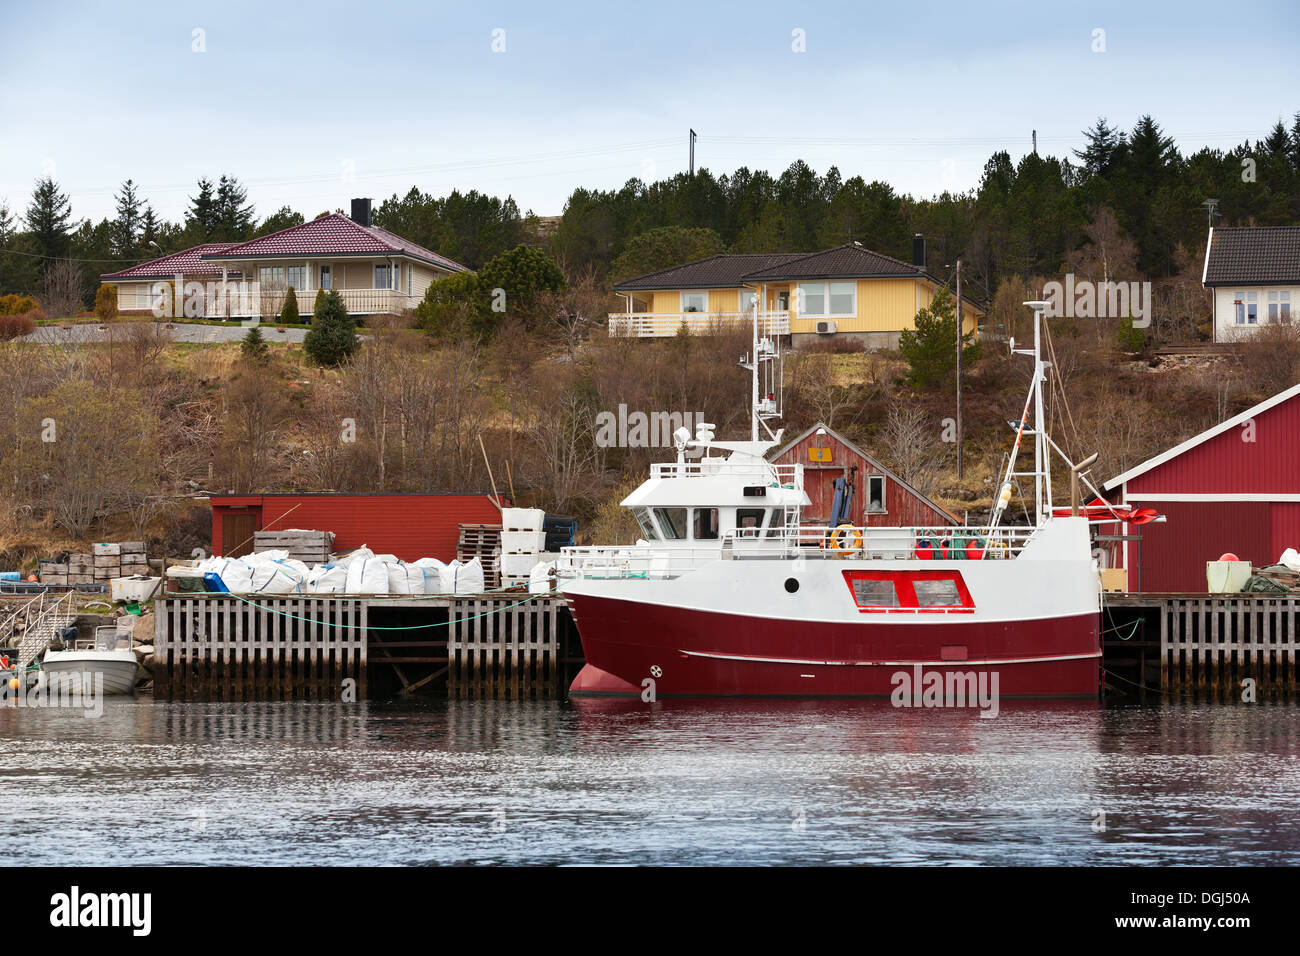 Small red and white fishing boat stands moored in Norway coastal town Stock Photo